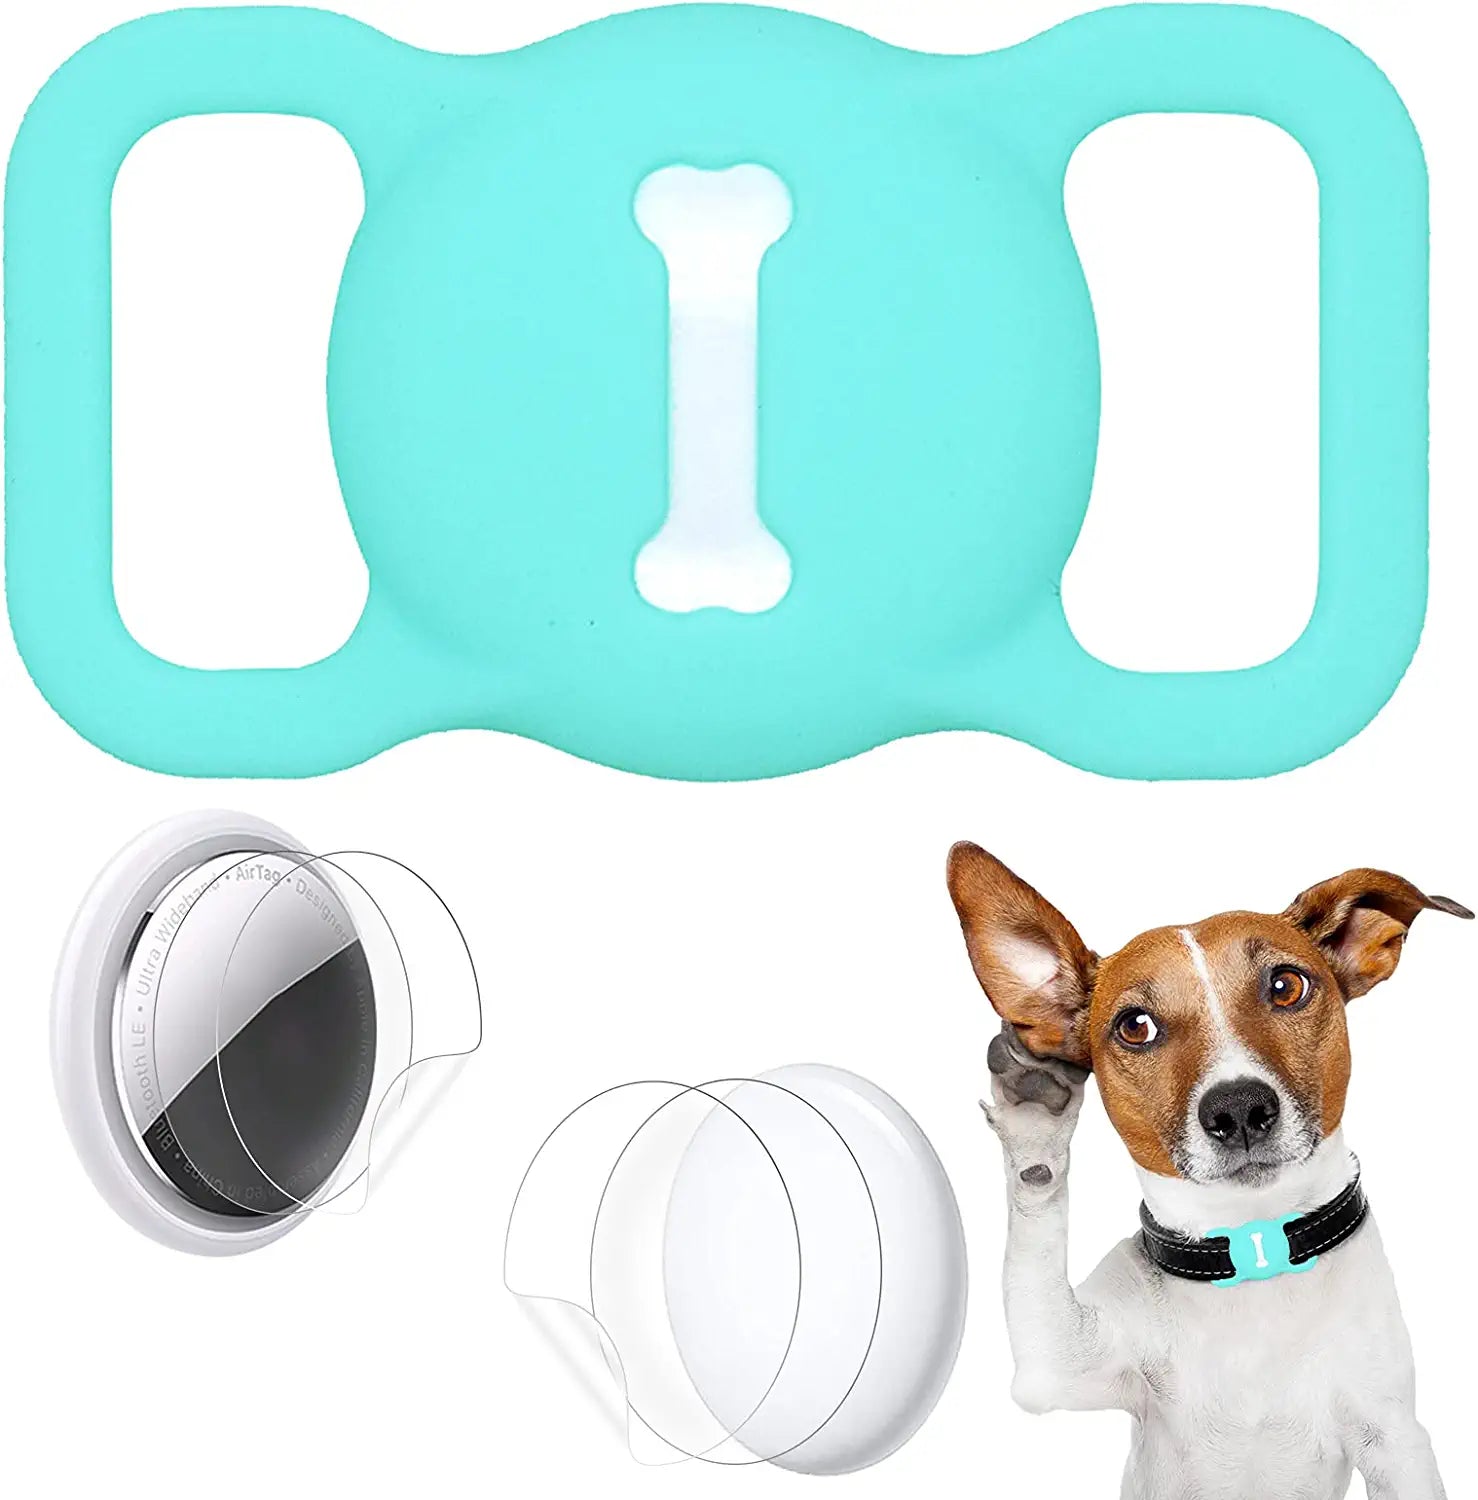 Protective Case Compatible for Apple Airtags for Dog Cat Collar Pet Loop Holder, Airtag Holder Accessories with Screen Protectors, Air Tag Silicone Cover for Pet Collar Electronics > GPS Accessories > GPS Cases Wustentre Mint Green  